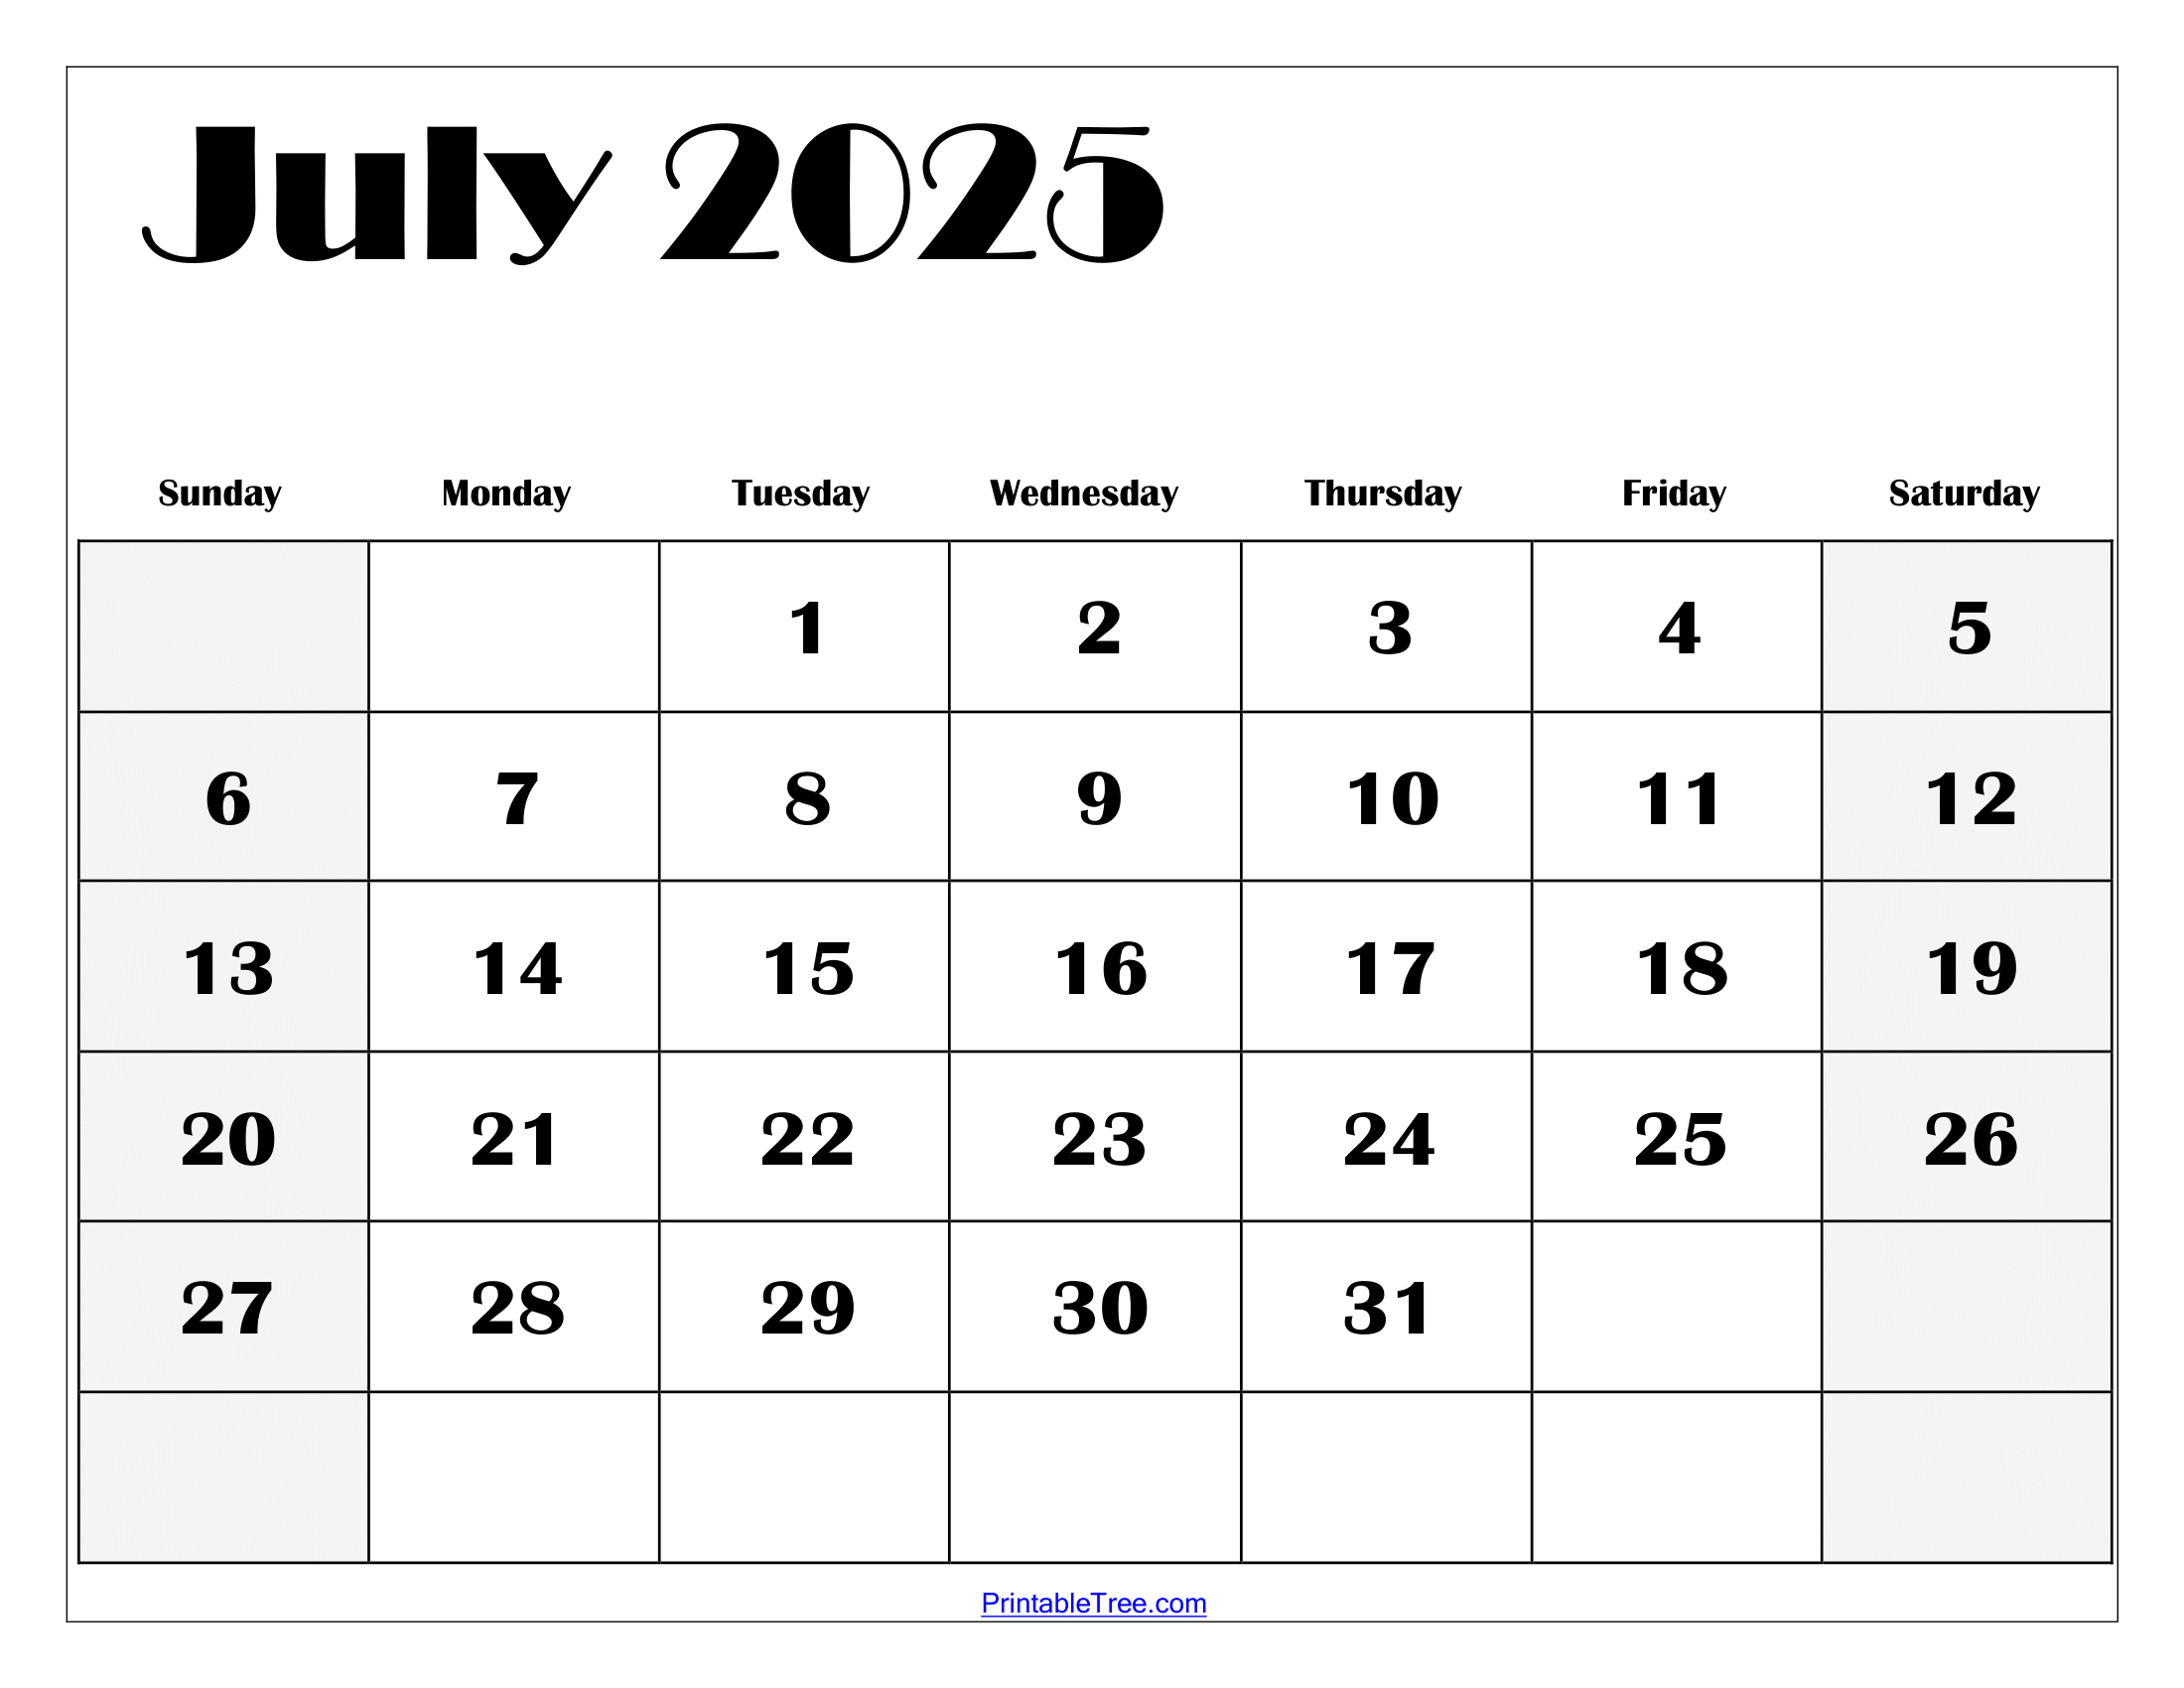 July 2025 Calendar Printable Pdf Template With Holidays pertaining to Calendar For July 2025